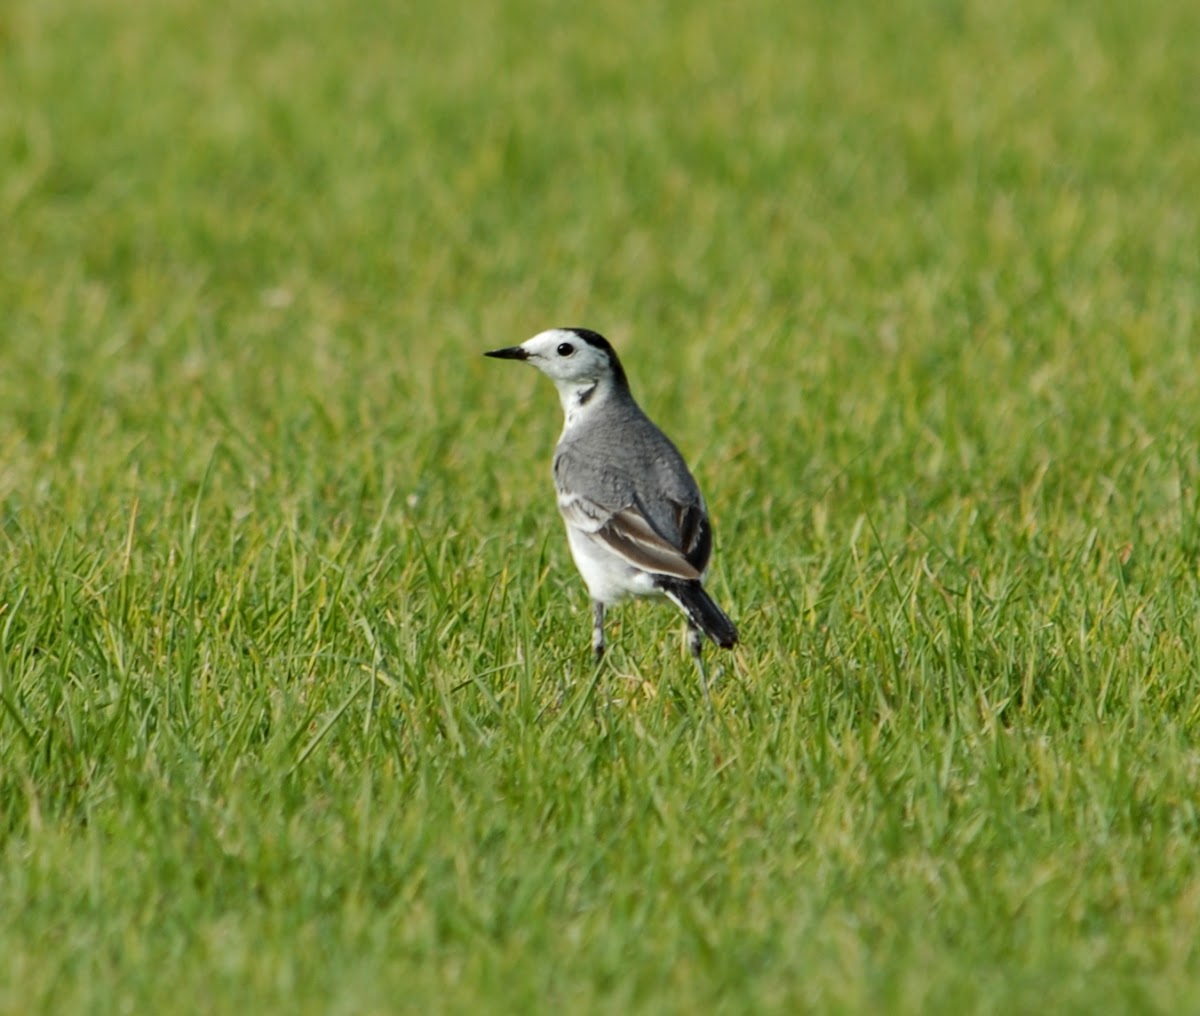 Wagtail - White Wagtail